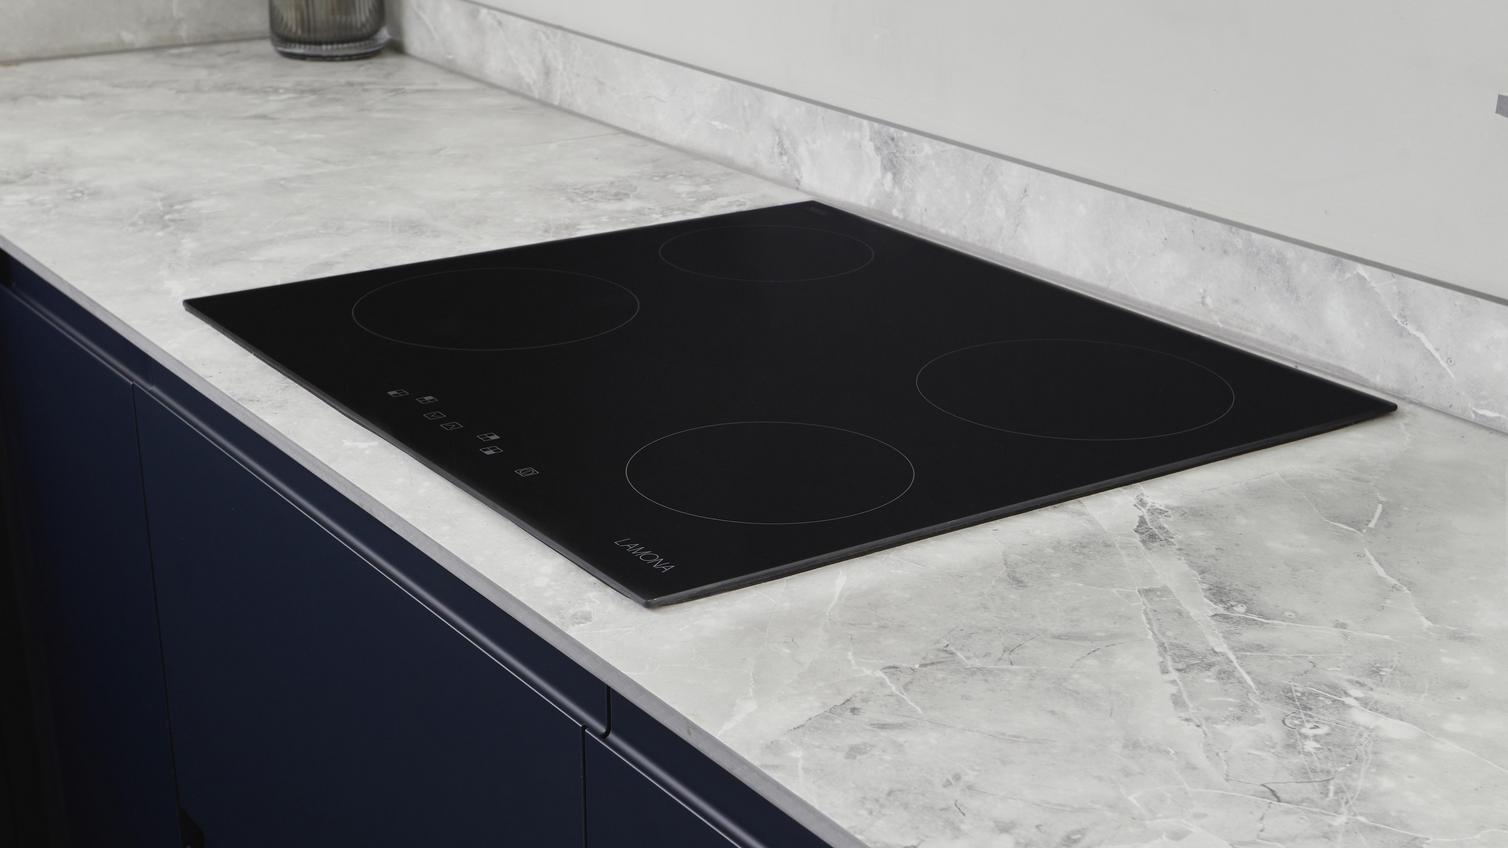 A black, electric Lamona hob, inset into a white marble-effect worktop. Behind the hob is a matching white upstand.